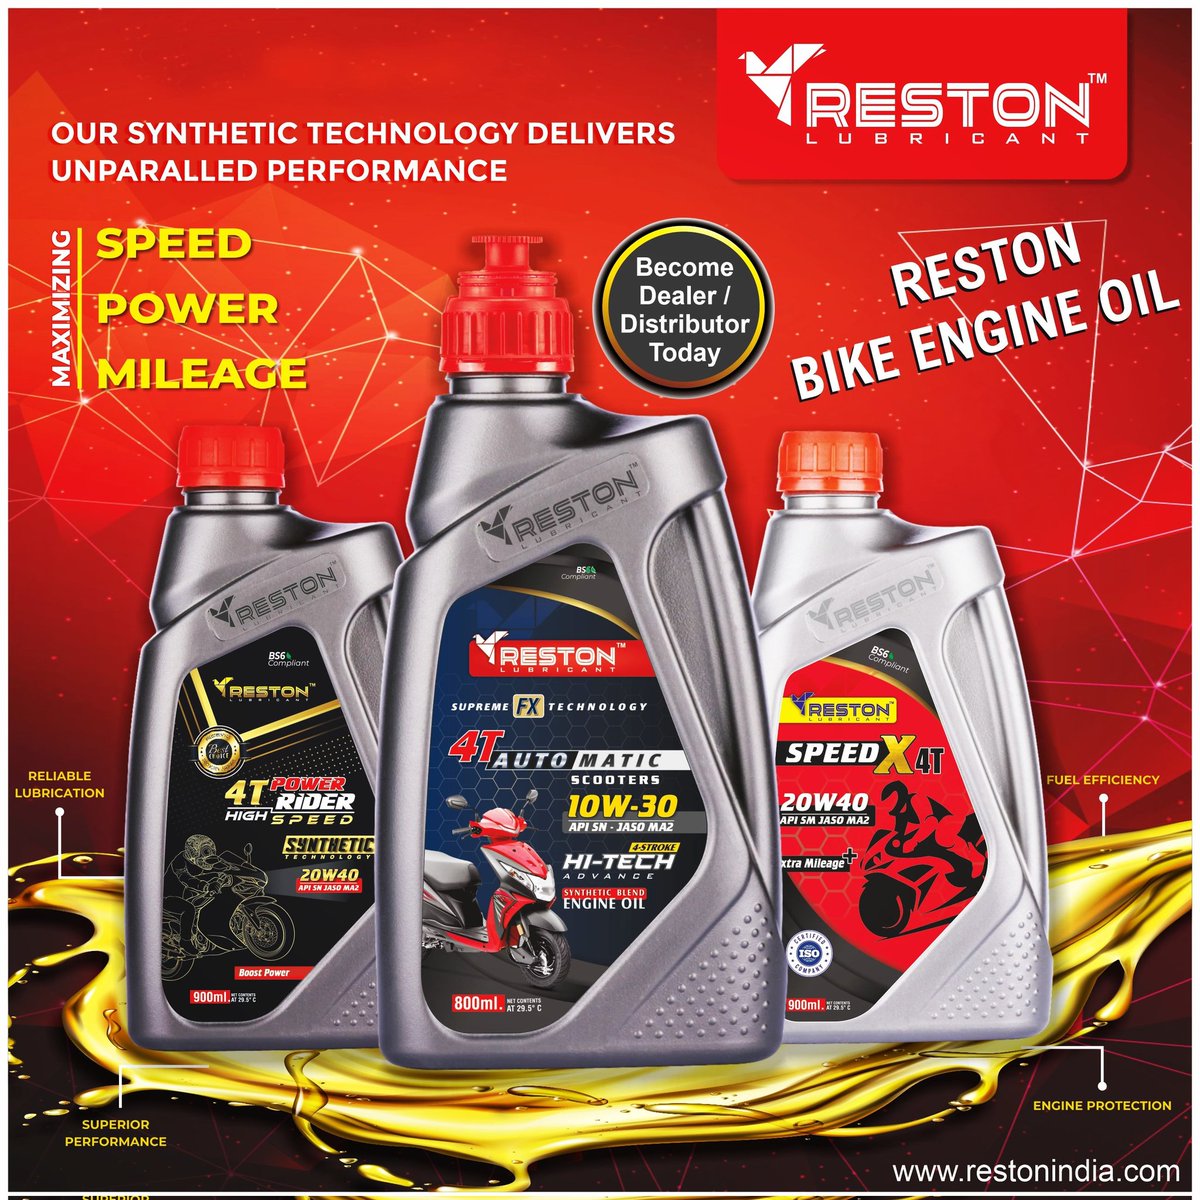 Become Distributor/ Dealer / Retailer of Reston Lubricant.. Reserve your District / City now!!
Premium Quality Engine Oil with Sales & Marketing Support!! 
Call now: +91 84 888 99 000
Web: restonlubricant.com
#restonlubricant
#perfectchoice 
#restonindia 
#kaguniversal